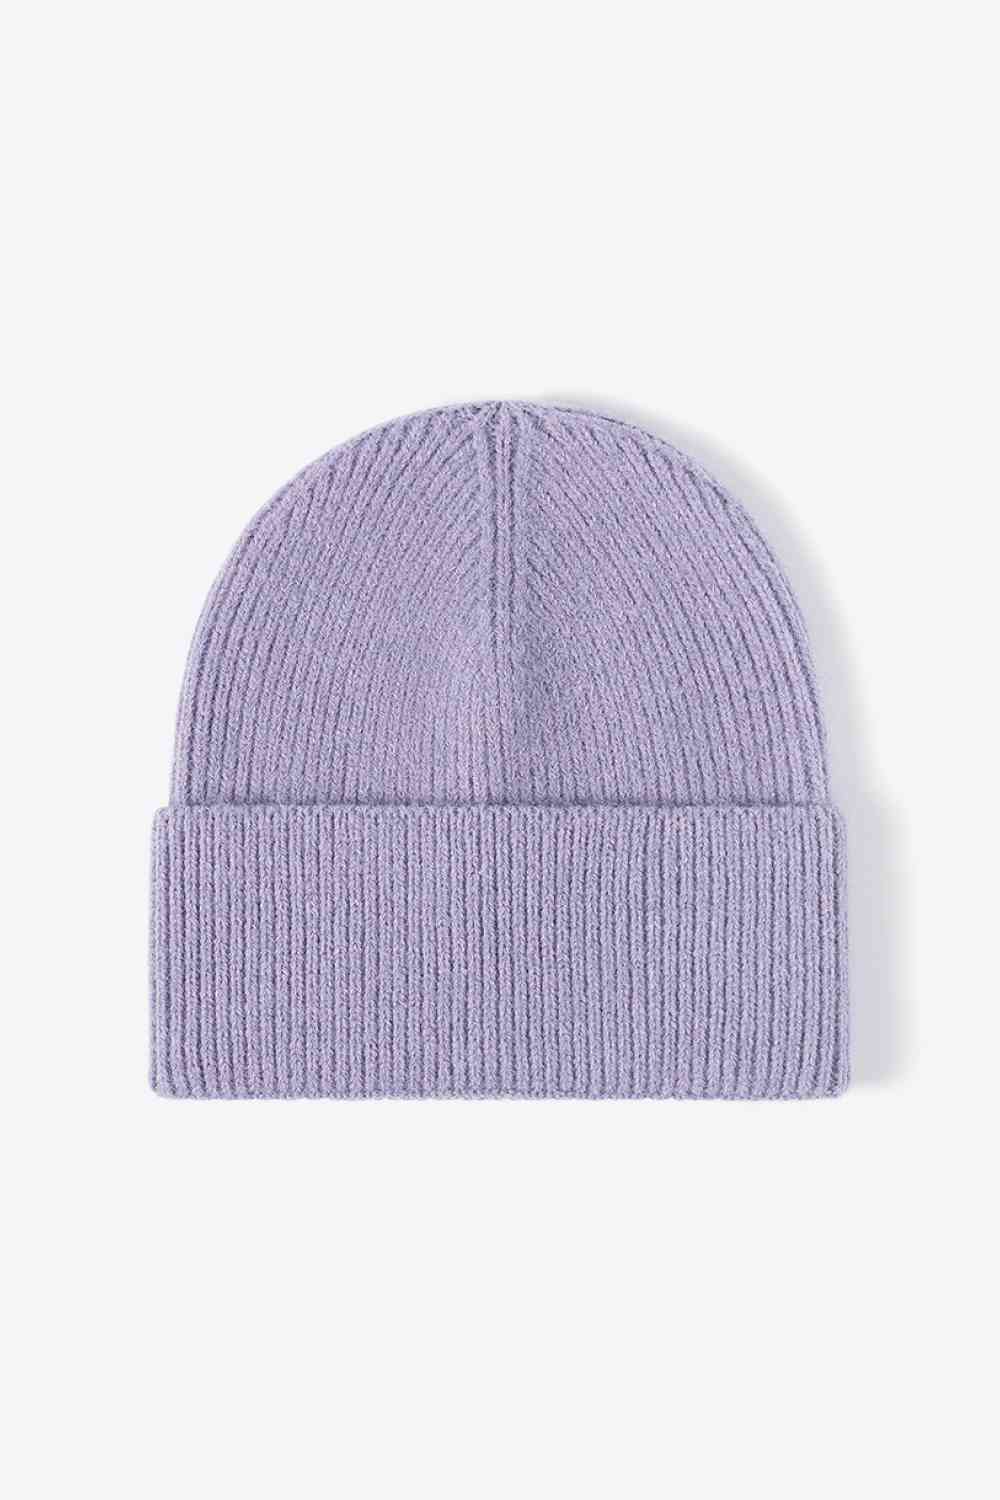 Warm In Chilly Days Knit Beanie Lilac One Size